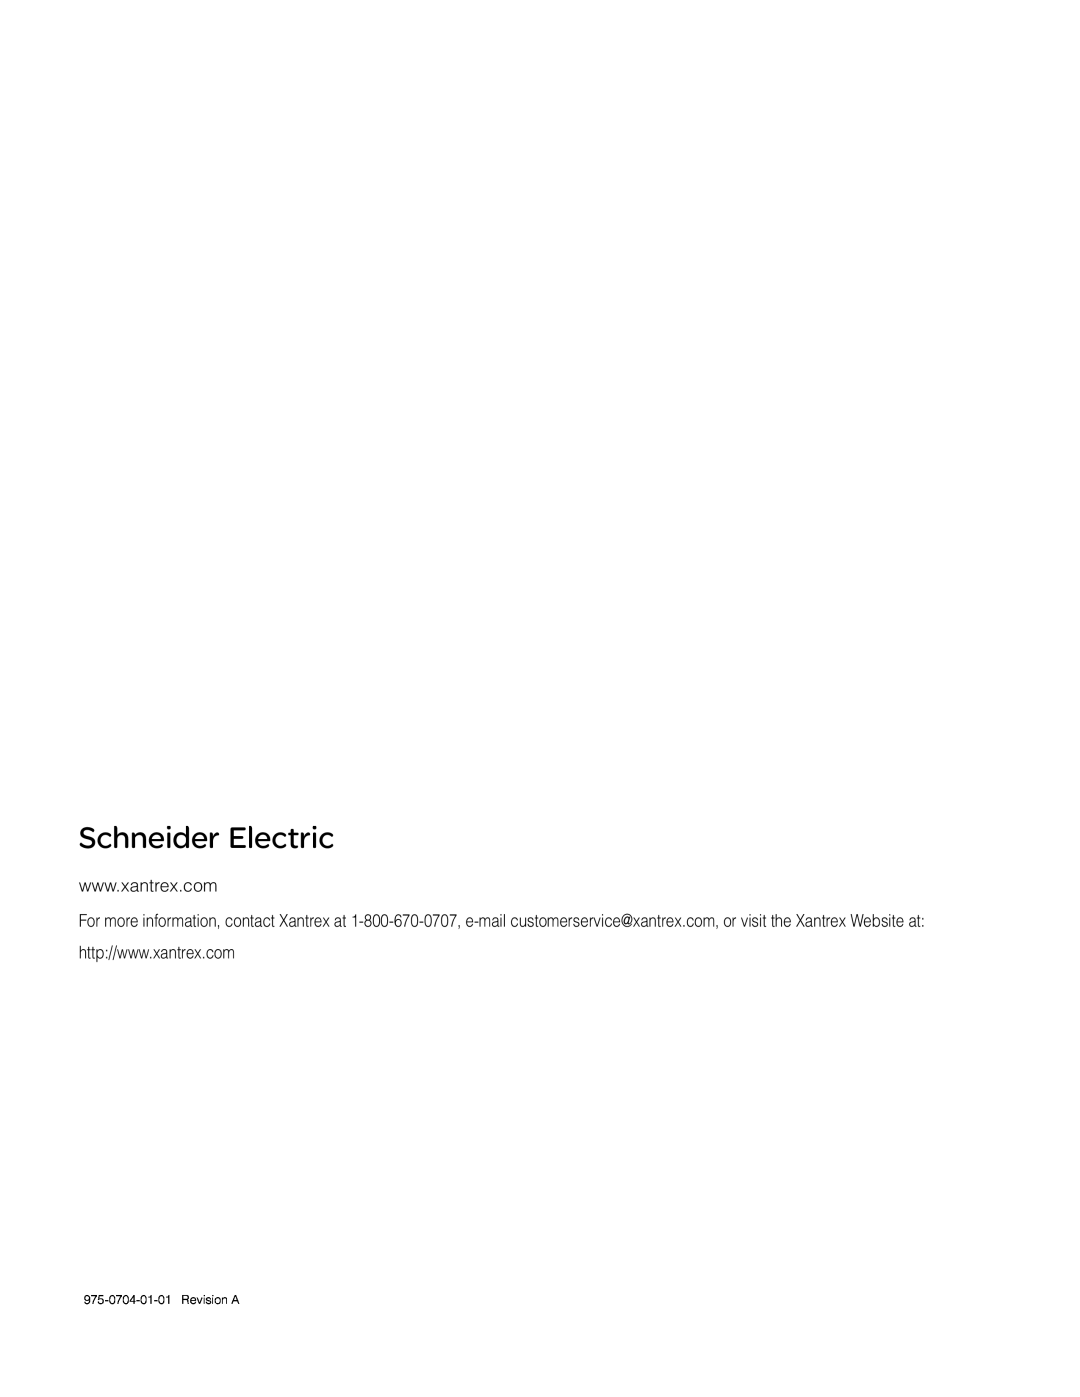 Xantrex Technology Freedom SW Series manual Schneider Electric, 975-0704-01-01Revision A 